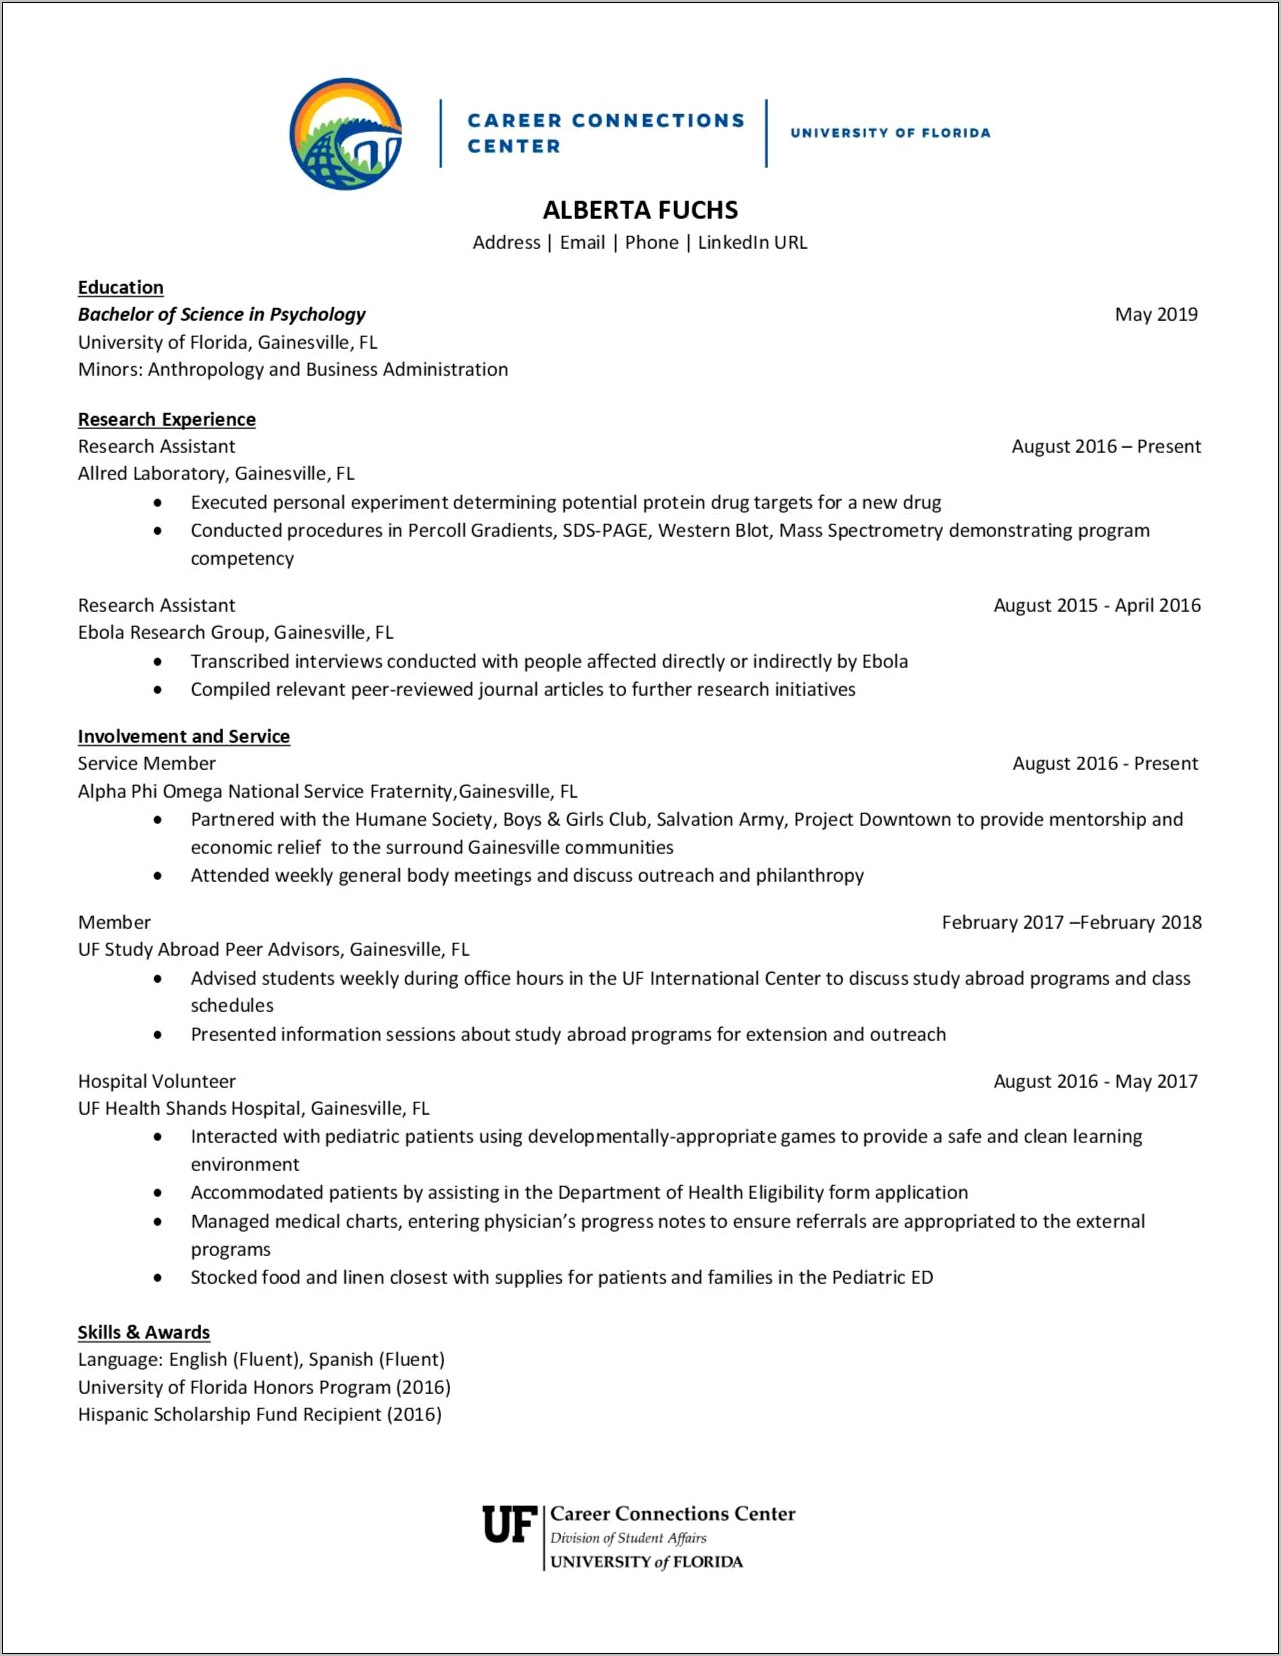 Does Fe Look Good On Resume